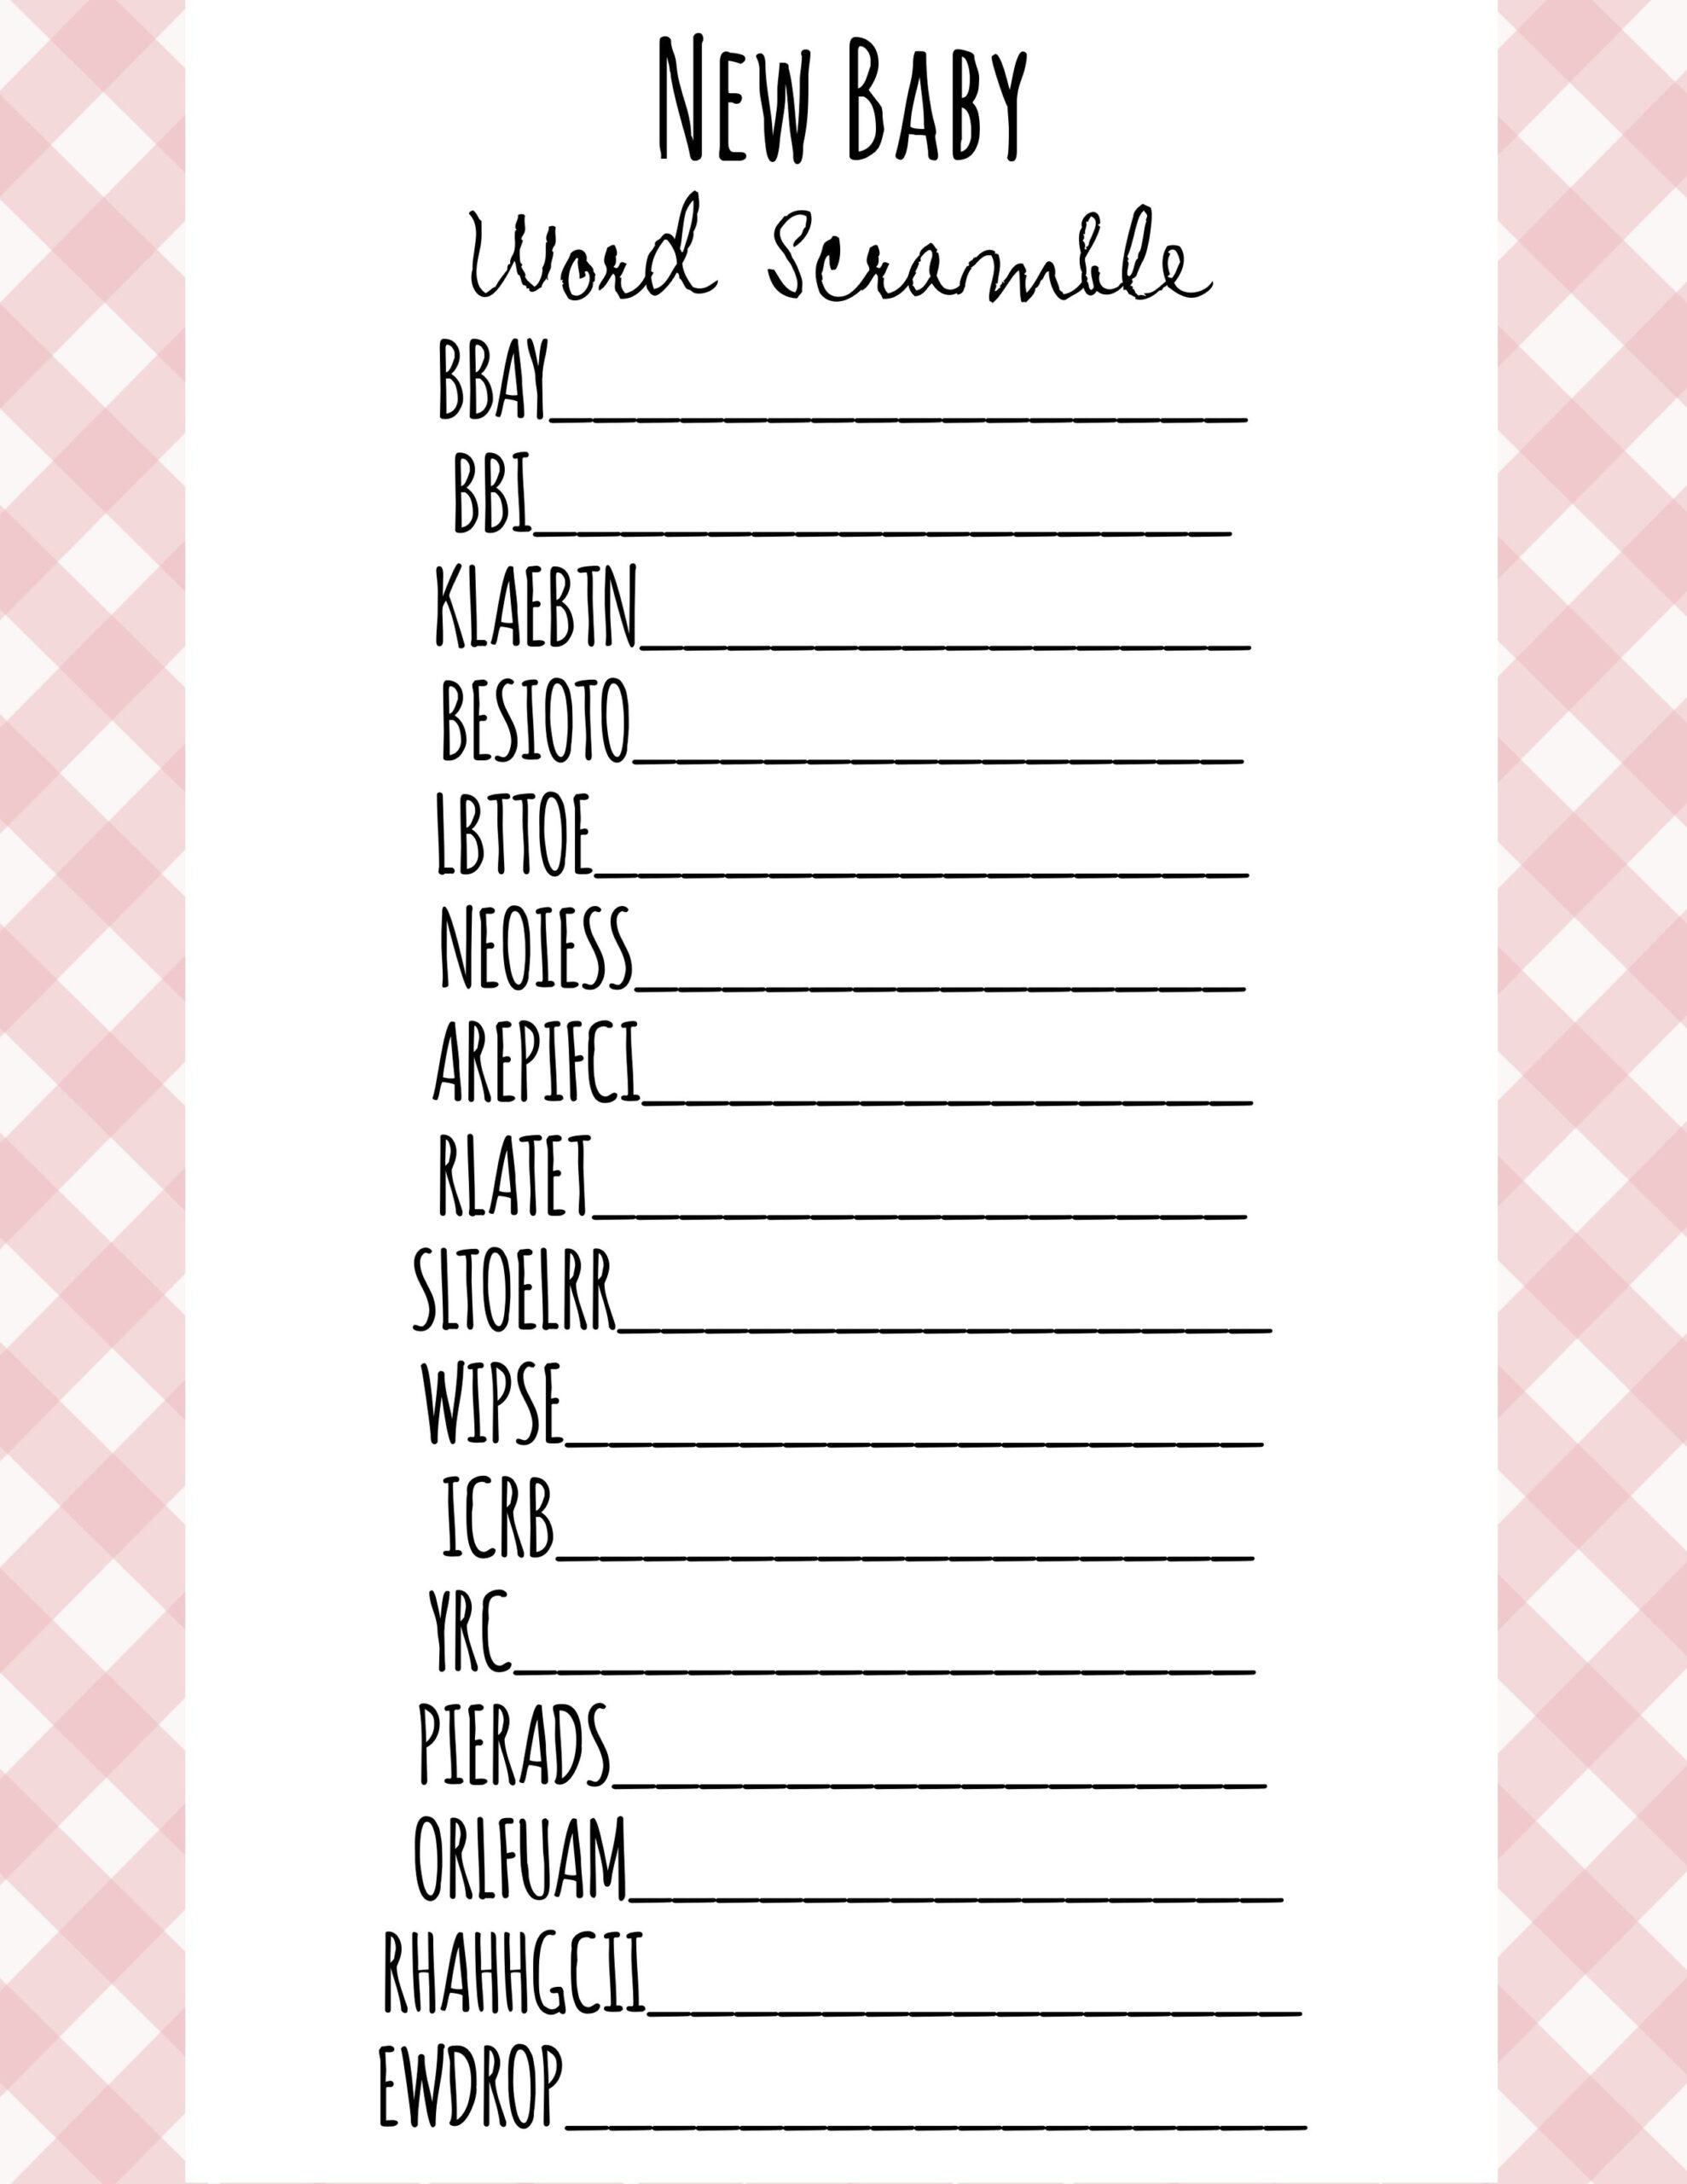 Free Printable Baby Shower Games - Download Instantly! inside Free Printable Baby Shower Games